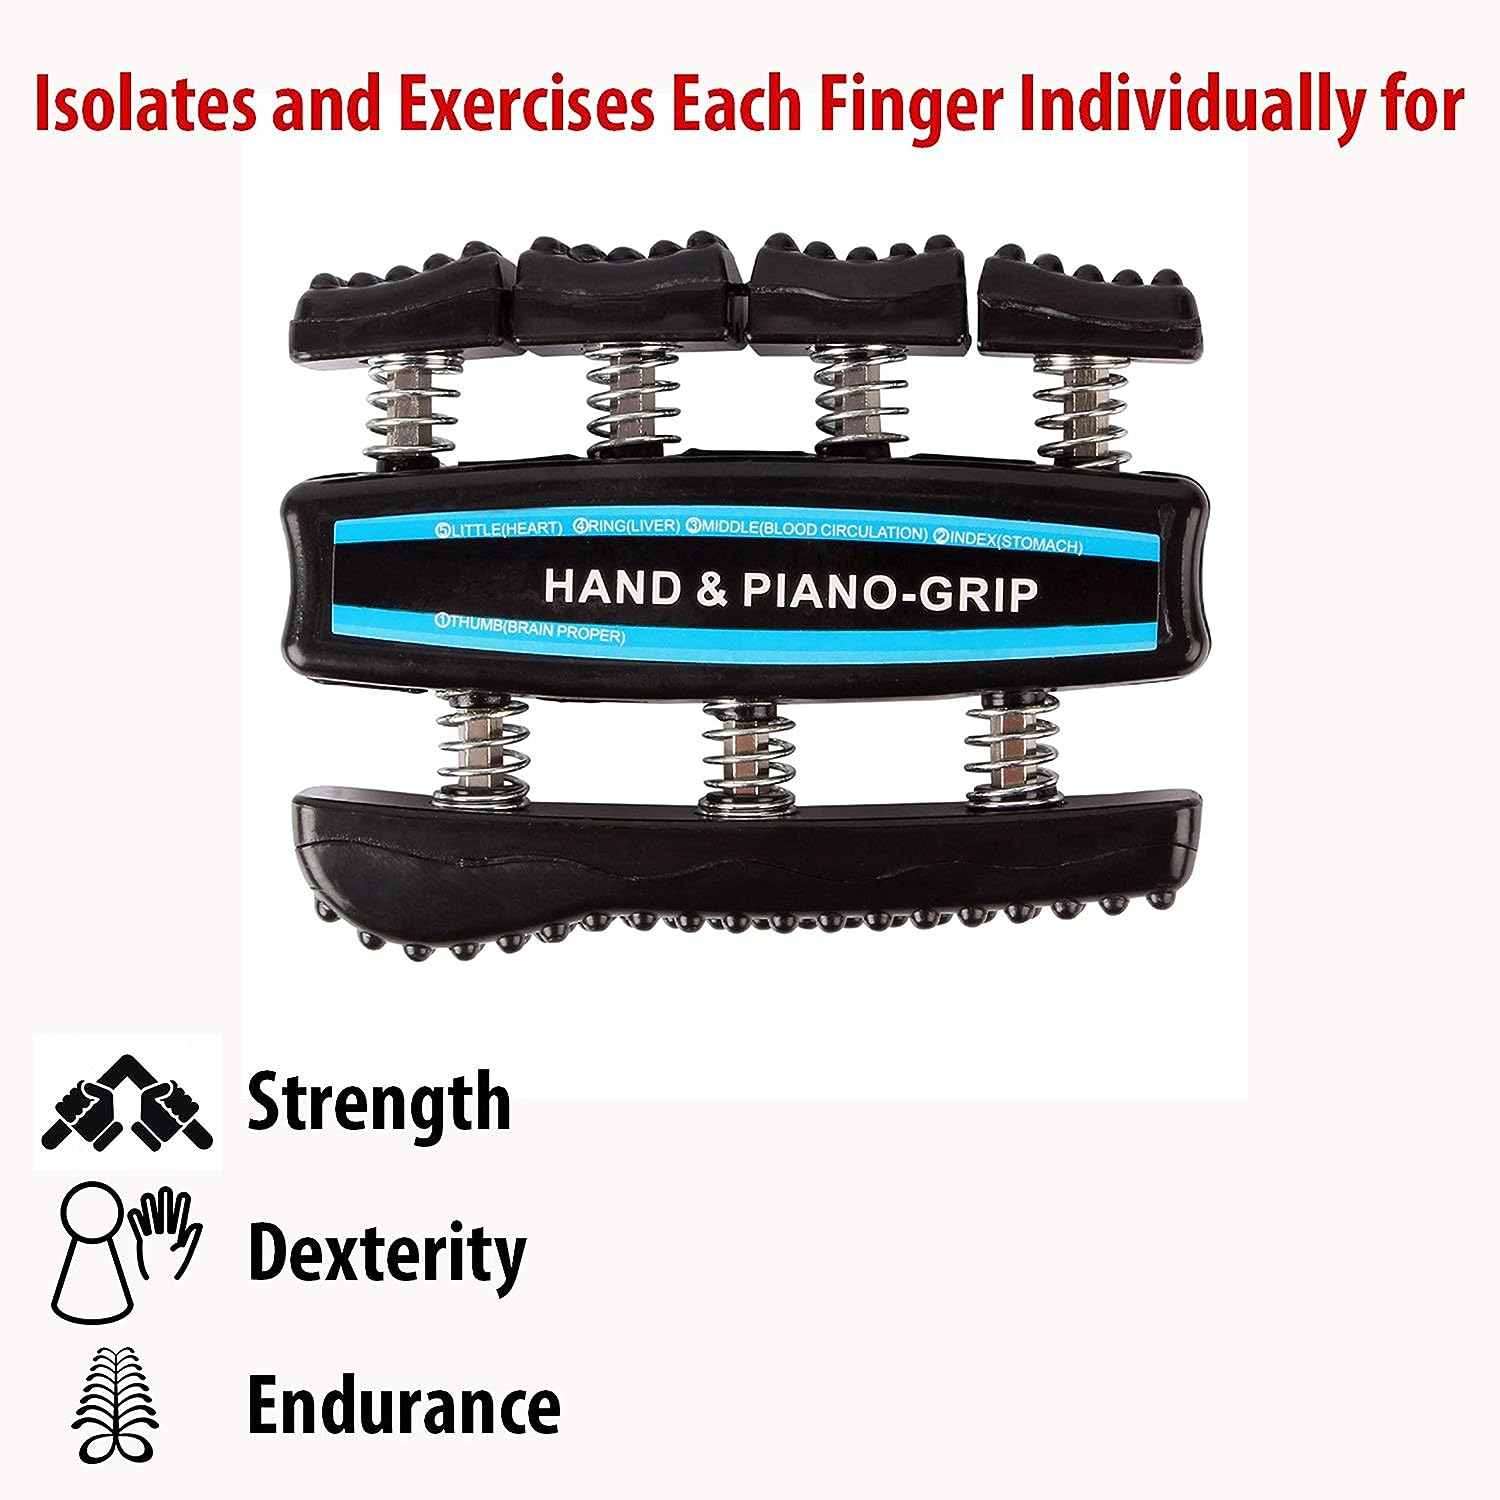 IMPORTIKAAH-Hand-Finger-Exerciser- Playing-Musicians-Sports